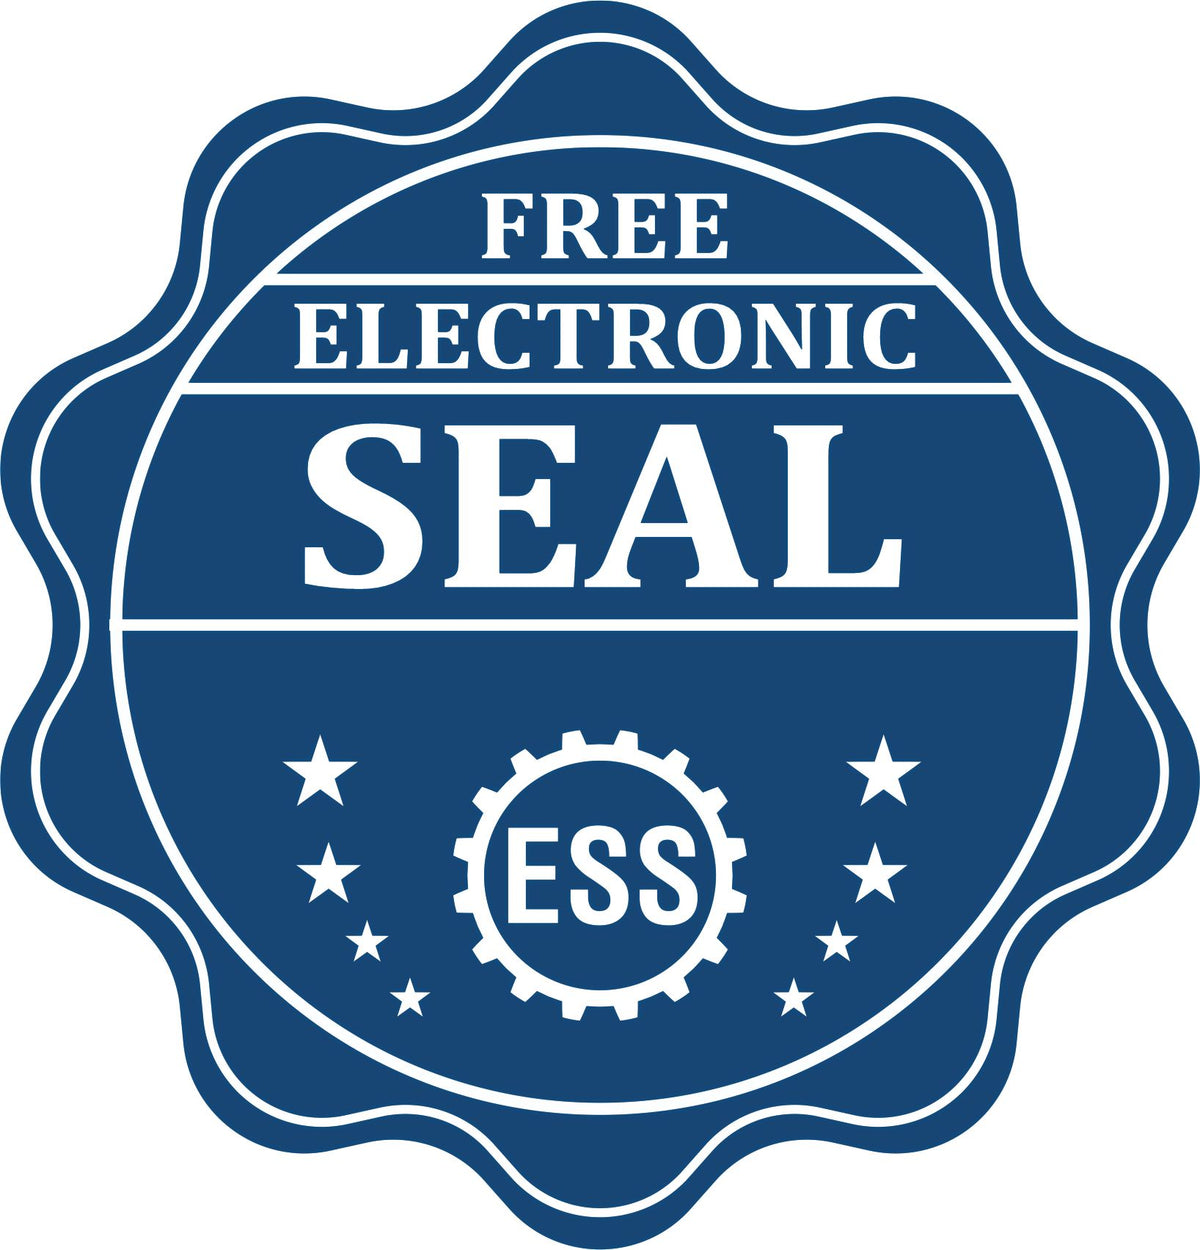 A badge showing a free electronic seal for the Soft Pocket North Dakota Landscape Architect Embosser with stars and the ESS gear on the emblem.